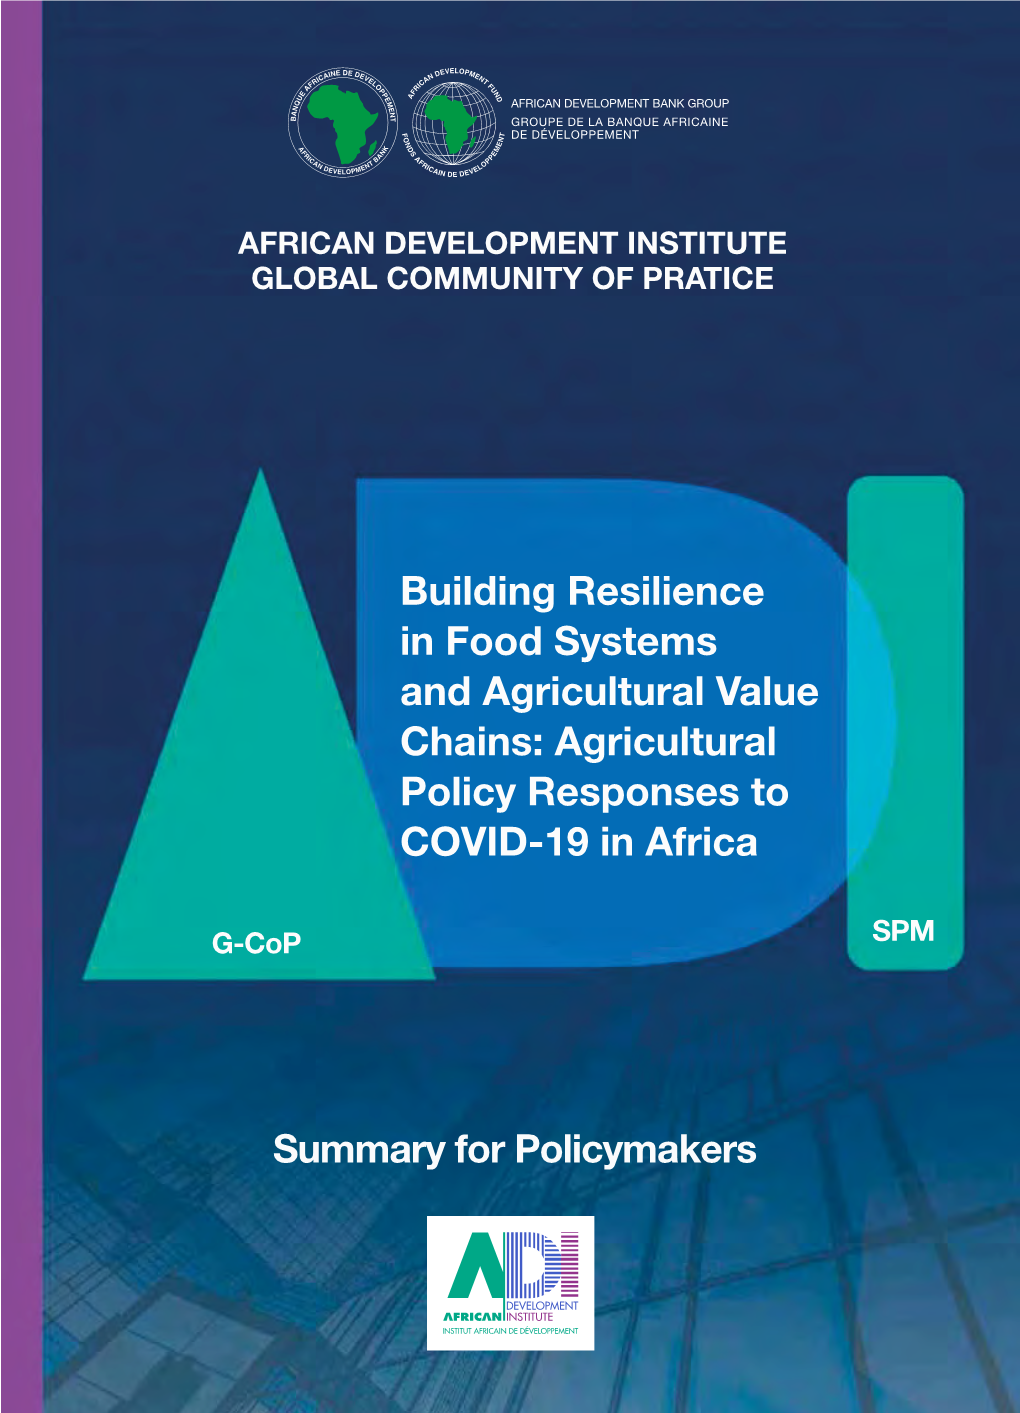 Agricultural Policy Responses to COVID-19 in Africa